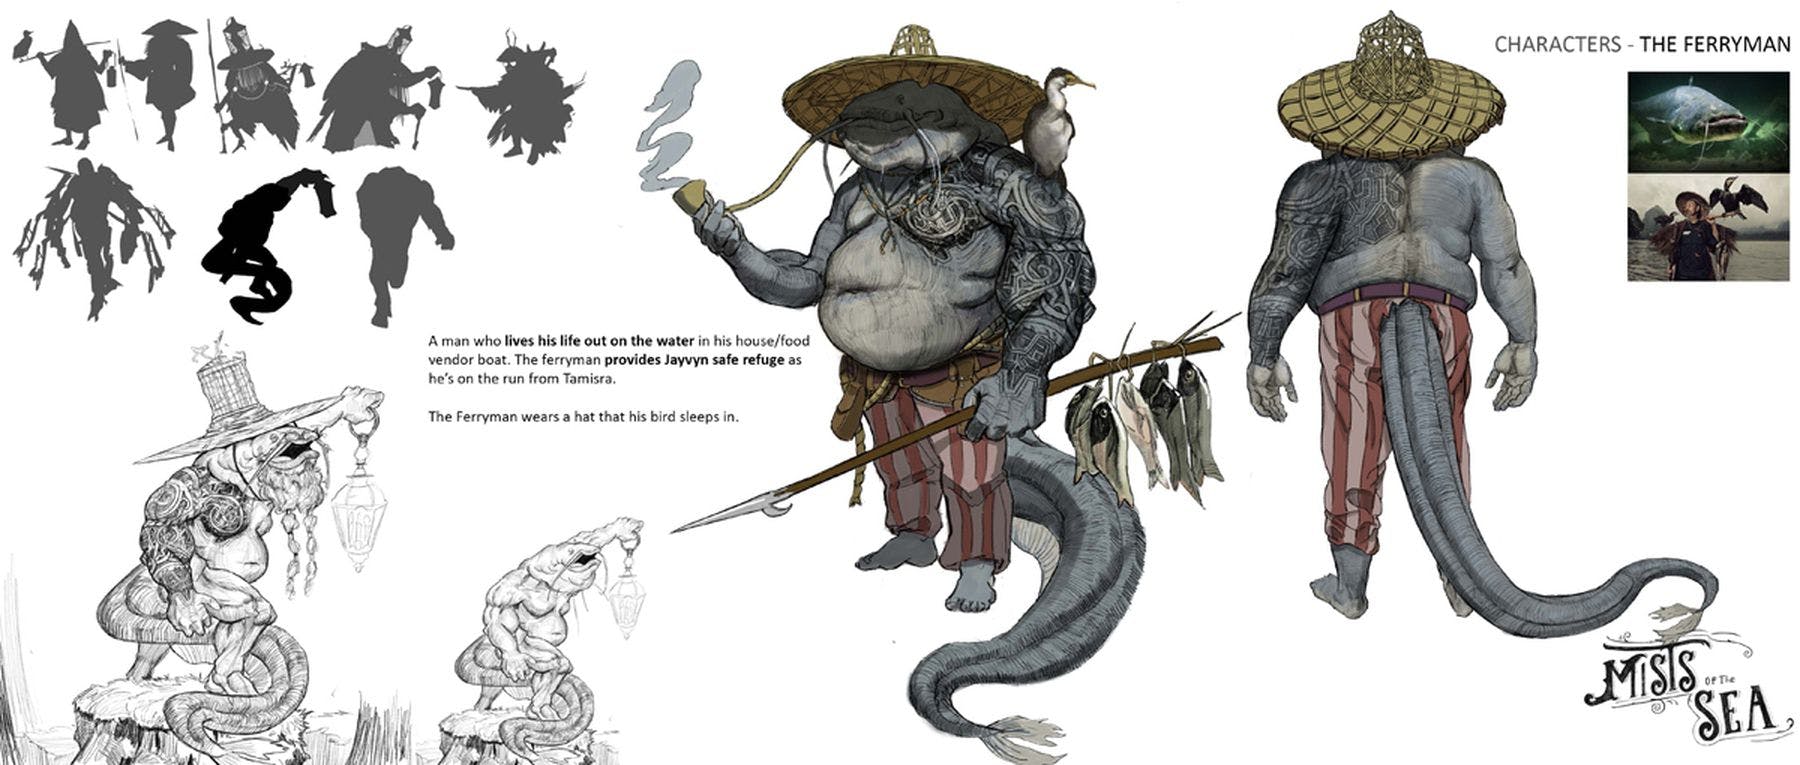 Illustrations of a character called The Ferryman, showing a front and back view and some development sketches. They are a blue/grey colour, have a long fish-like tale and are wearing a brown straw hat and red striped trousers. The text reads: A man who lives his life out on the water in his house/food vendor boat. The ferryman provides Jayvyn safe refuge as he's on the run from Tamisra. The Ferryman wears a hat that his bird sleeps in.